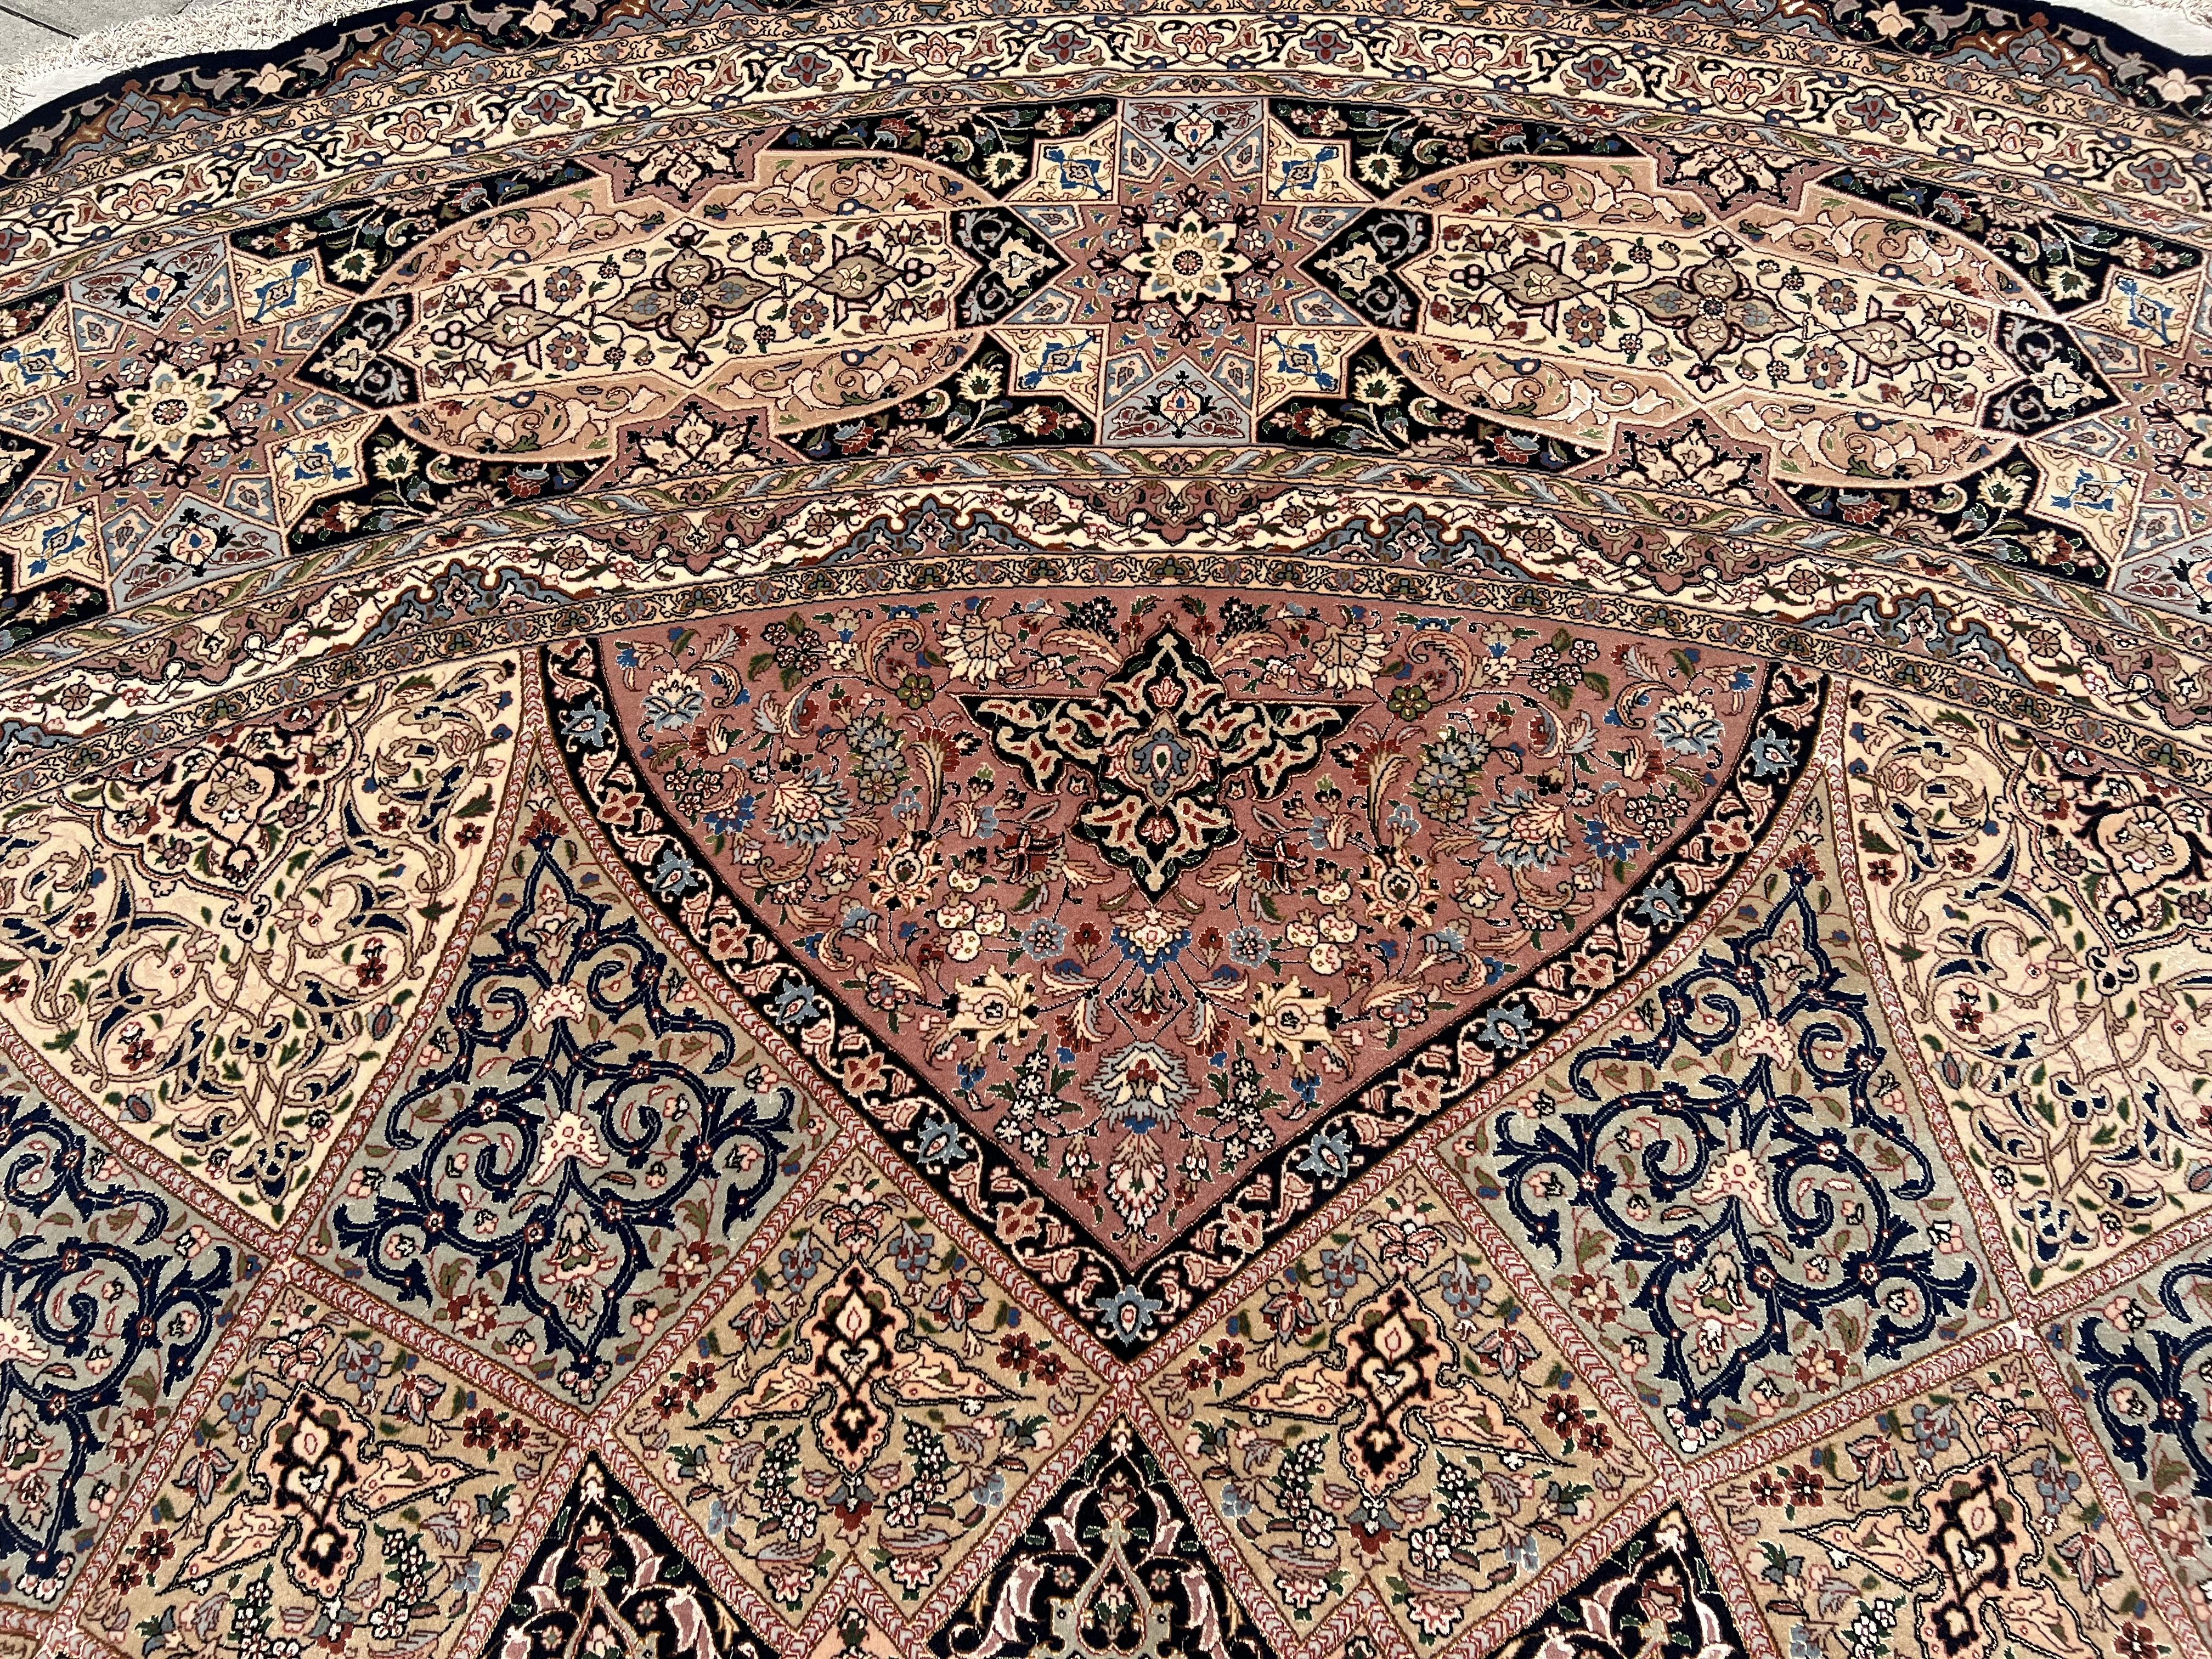 Palatial Persian Tabriz Silk & Wool Gonbad Design Circular Rug 
The word “Gonbad” translates from Farsi into “dome” in English. It refers to the ornate domes that are found in Mosques throughout the world. Therefore, Persian Gonbad rugs are those